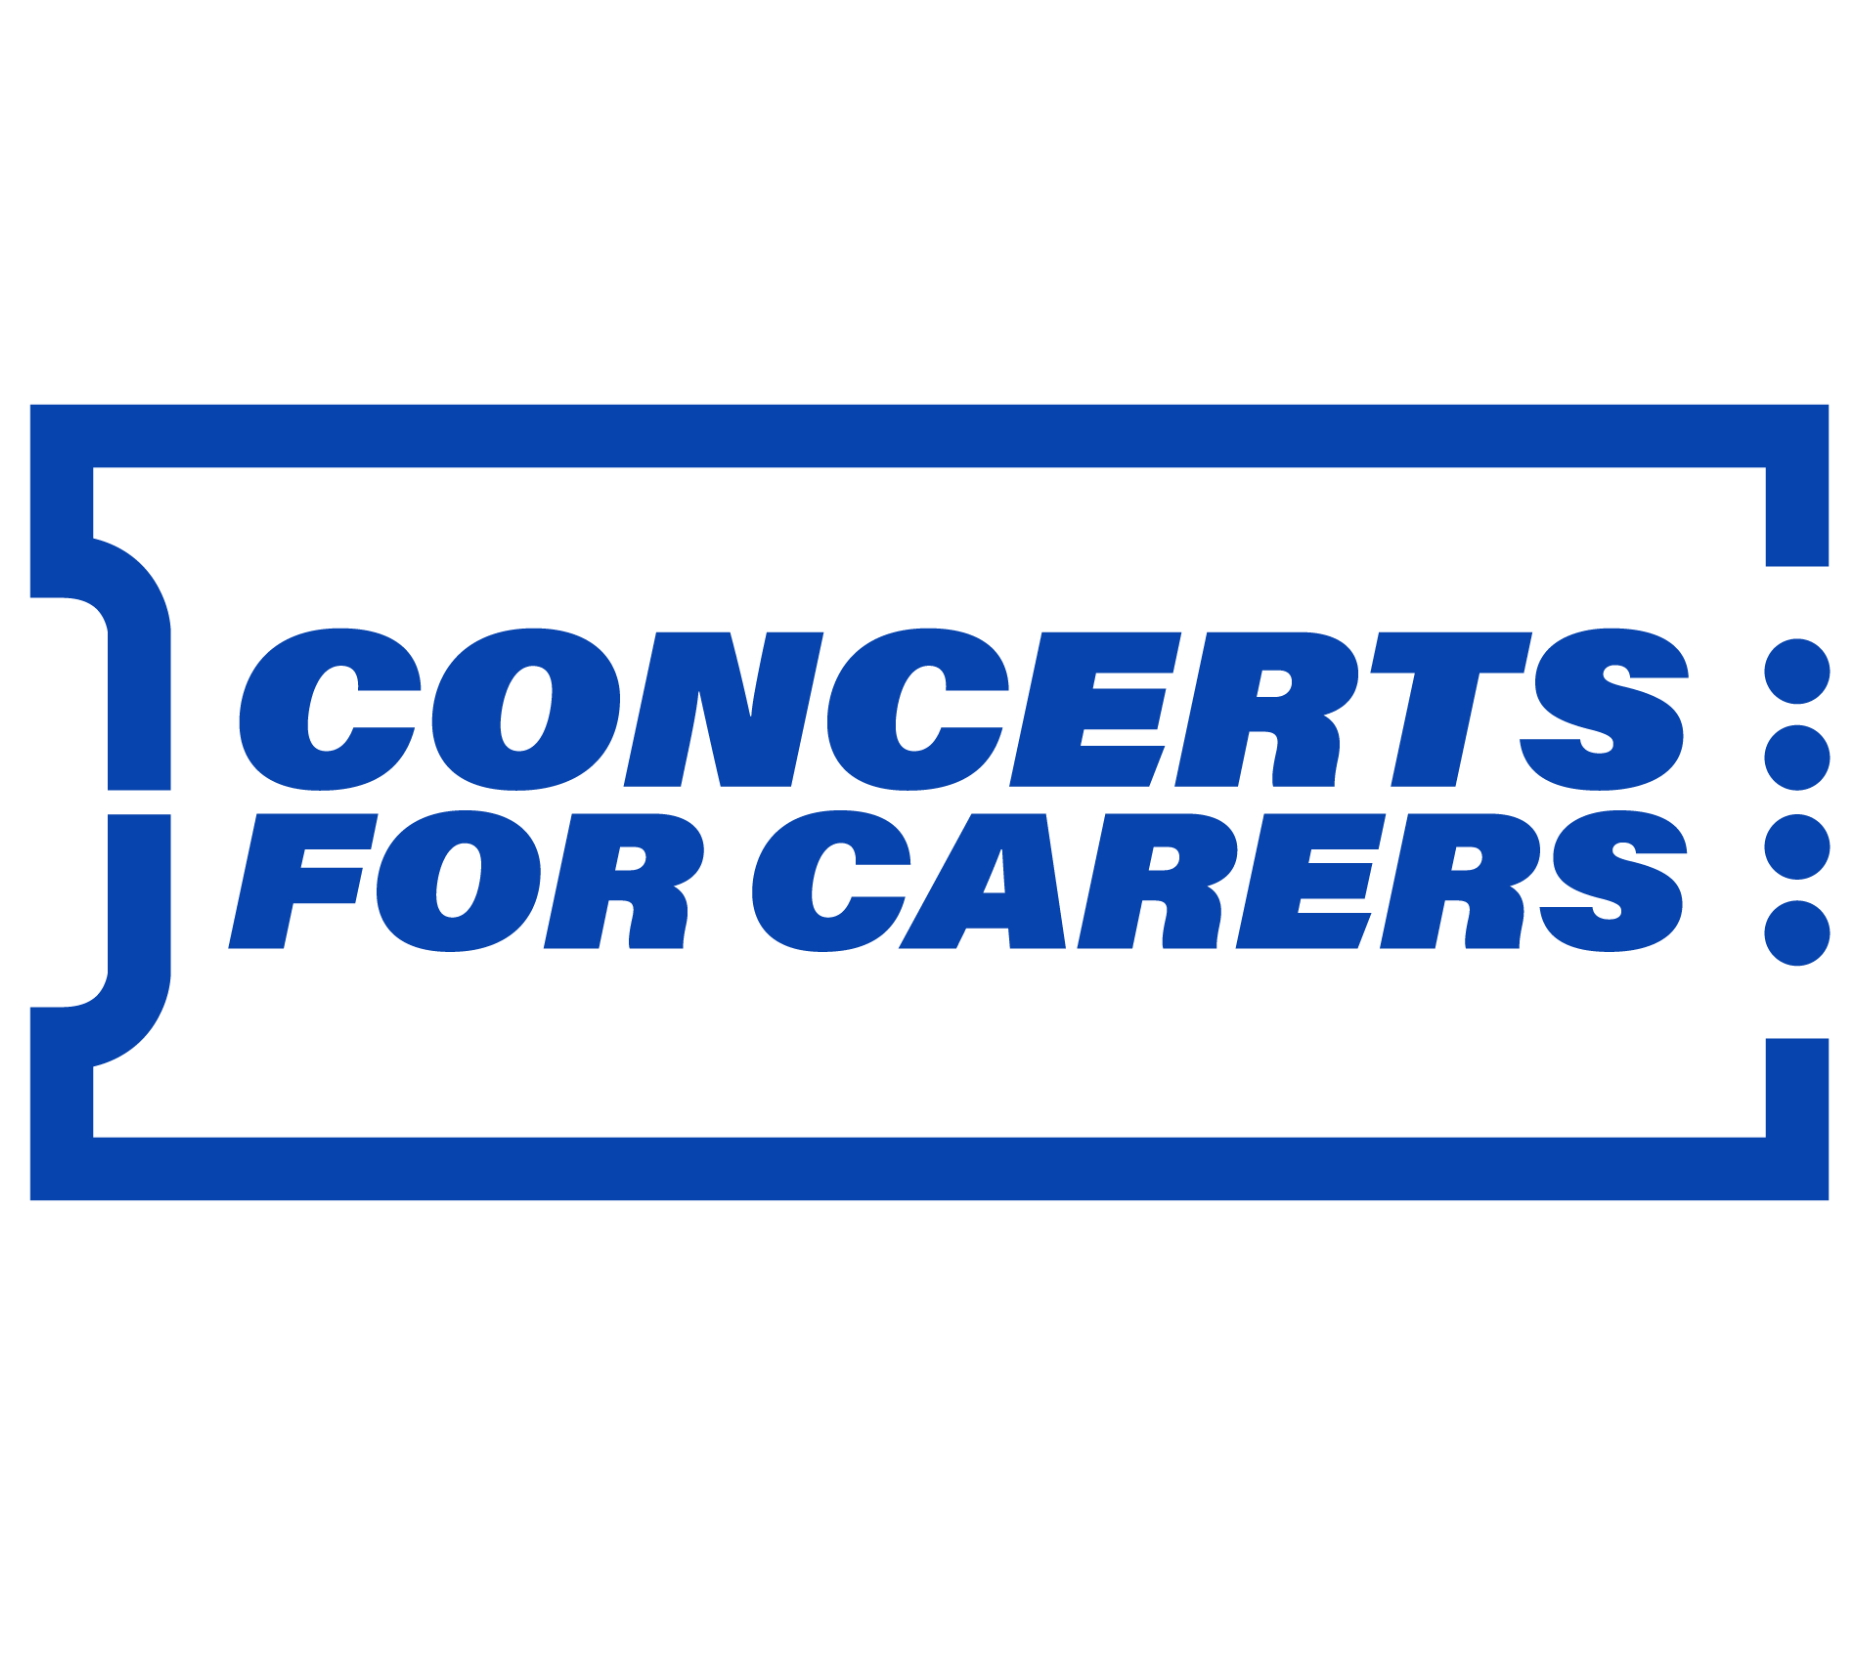 concerts for carers blue